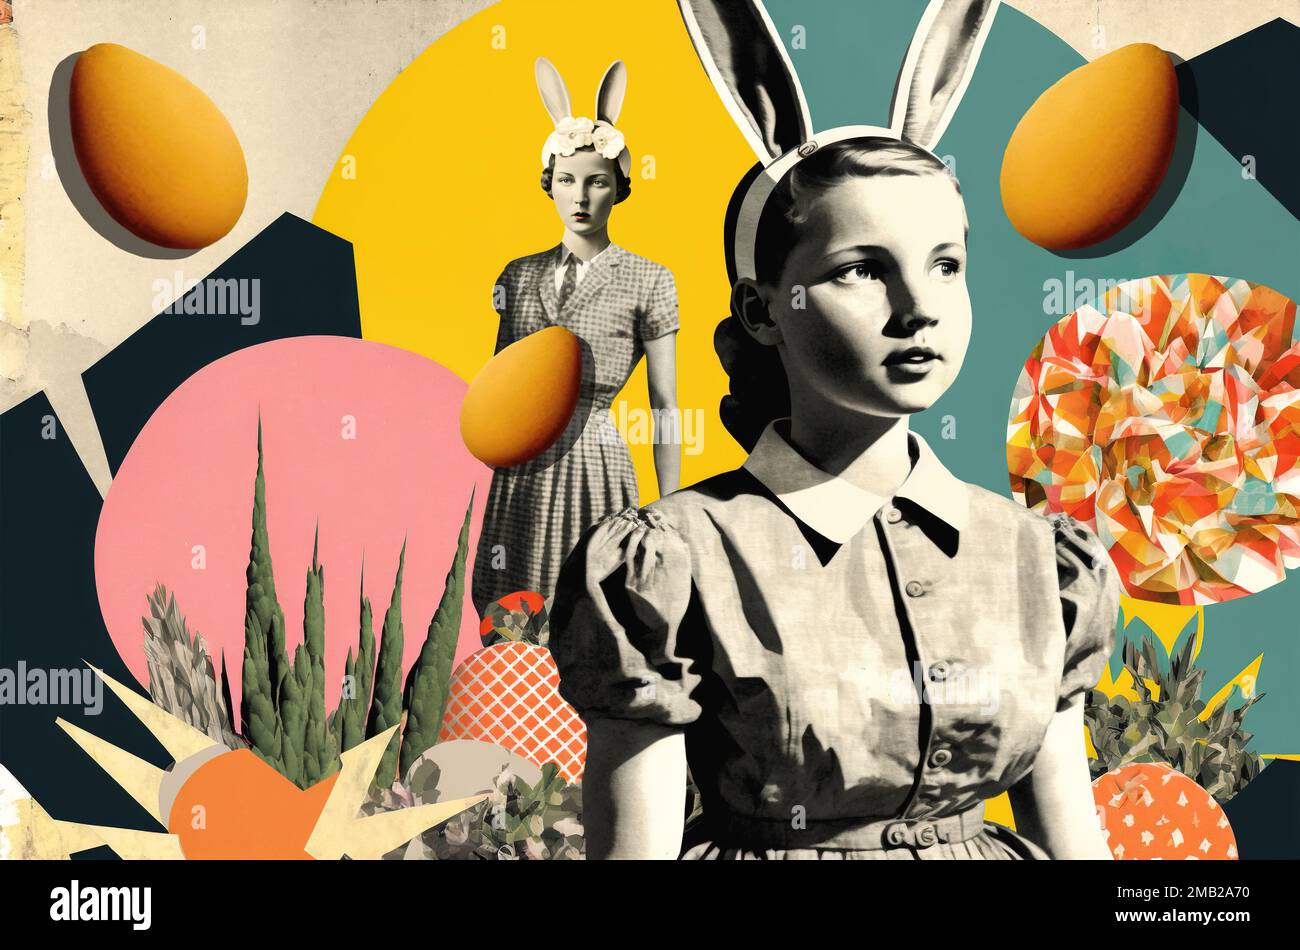 Funny Easter bunny girls. Retro style pop art collage Stock Photo